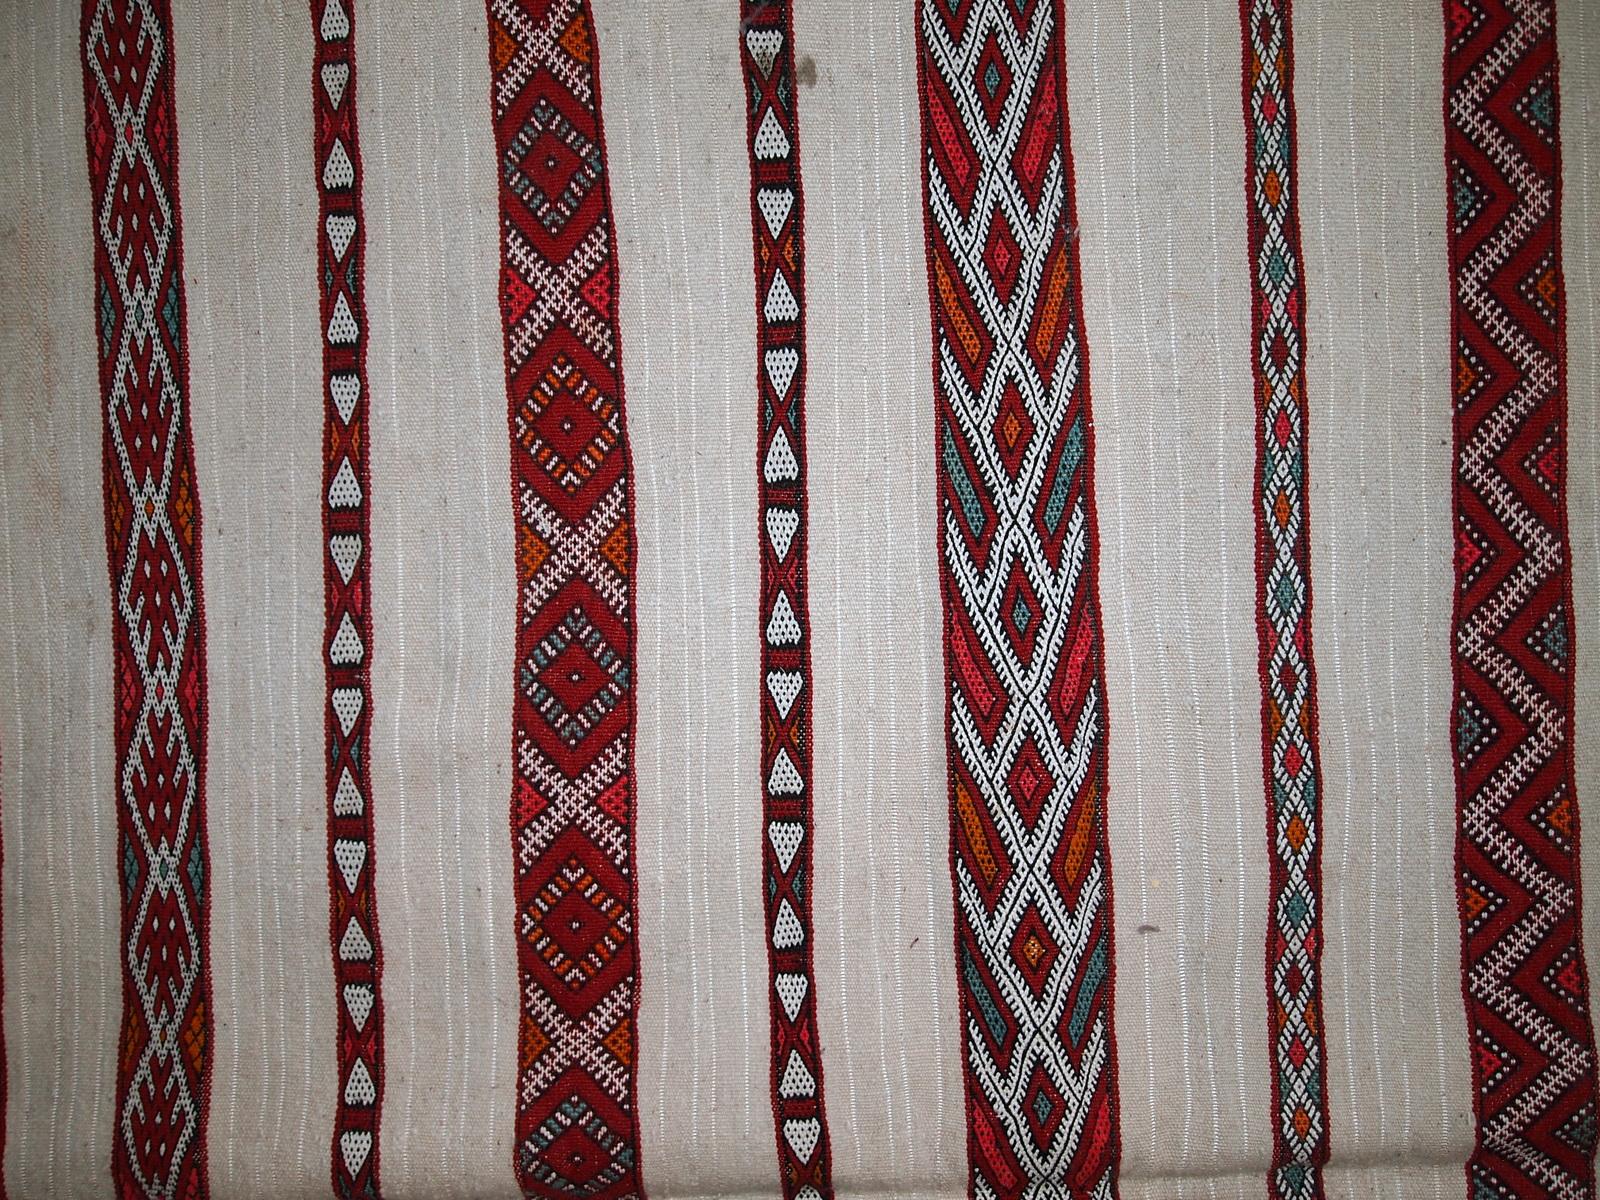 Handmade Vintage Moroccan Kilim, 1950s, 1C214 In Fair Condition For Sale In Bordeaux, FR